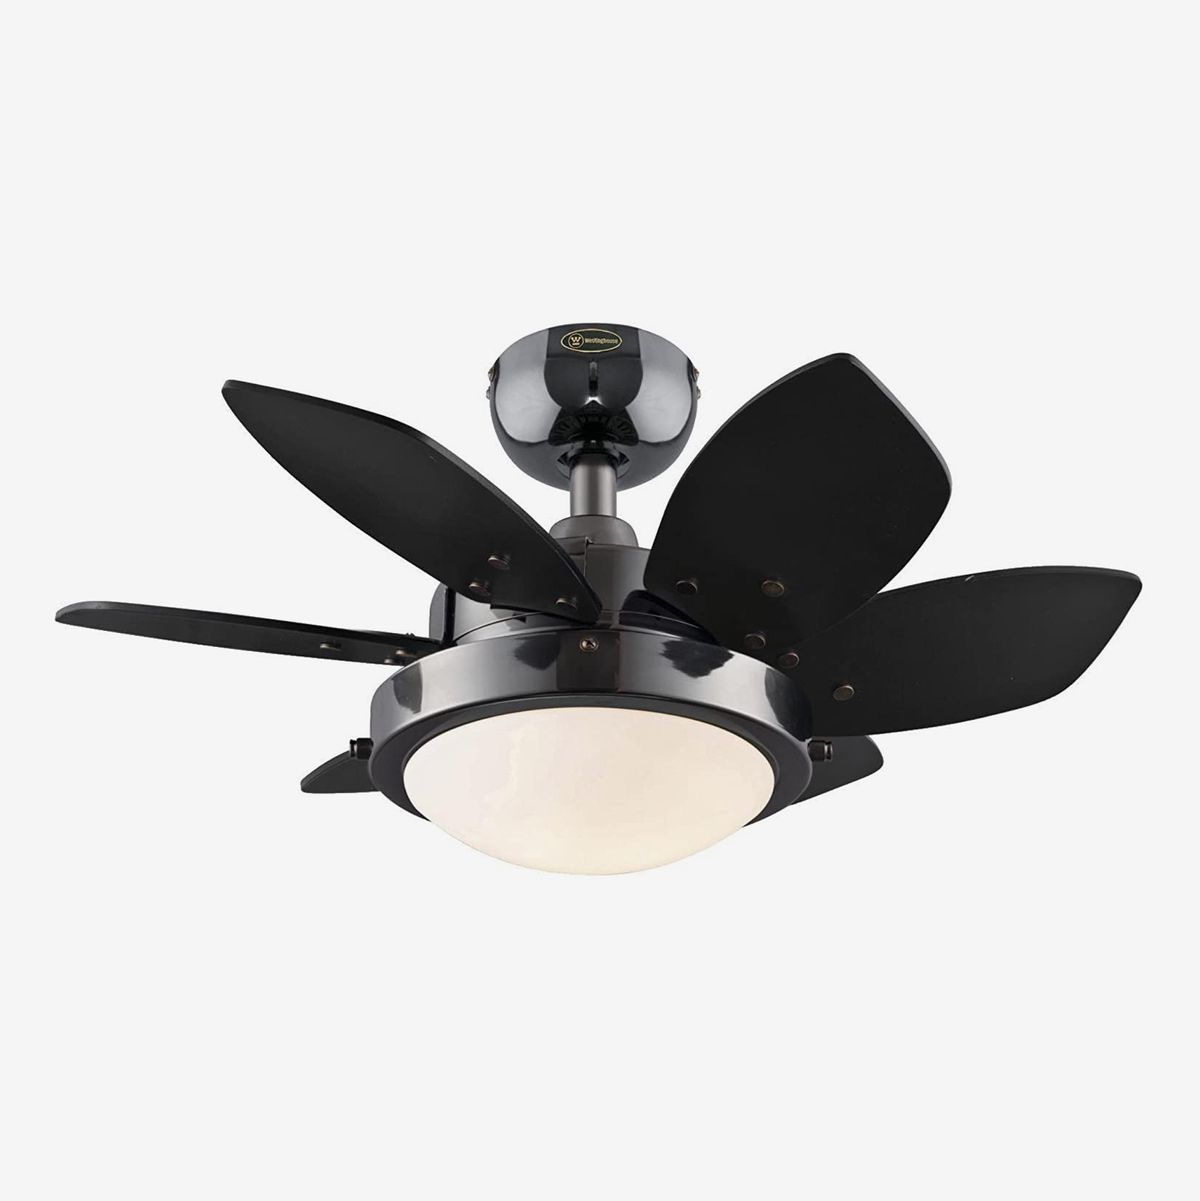 16 Best Ceiling Fans 2020 The Strategist New York Magazine,How To Make The Most Out Of A Small Bedroom